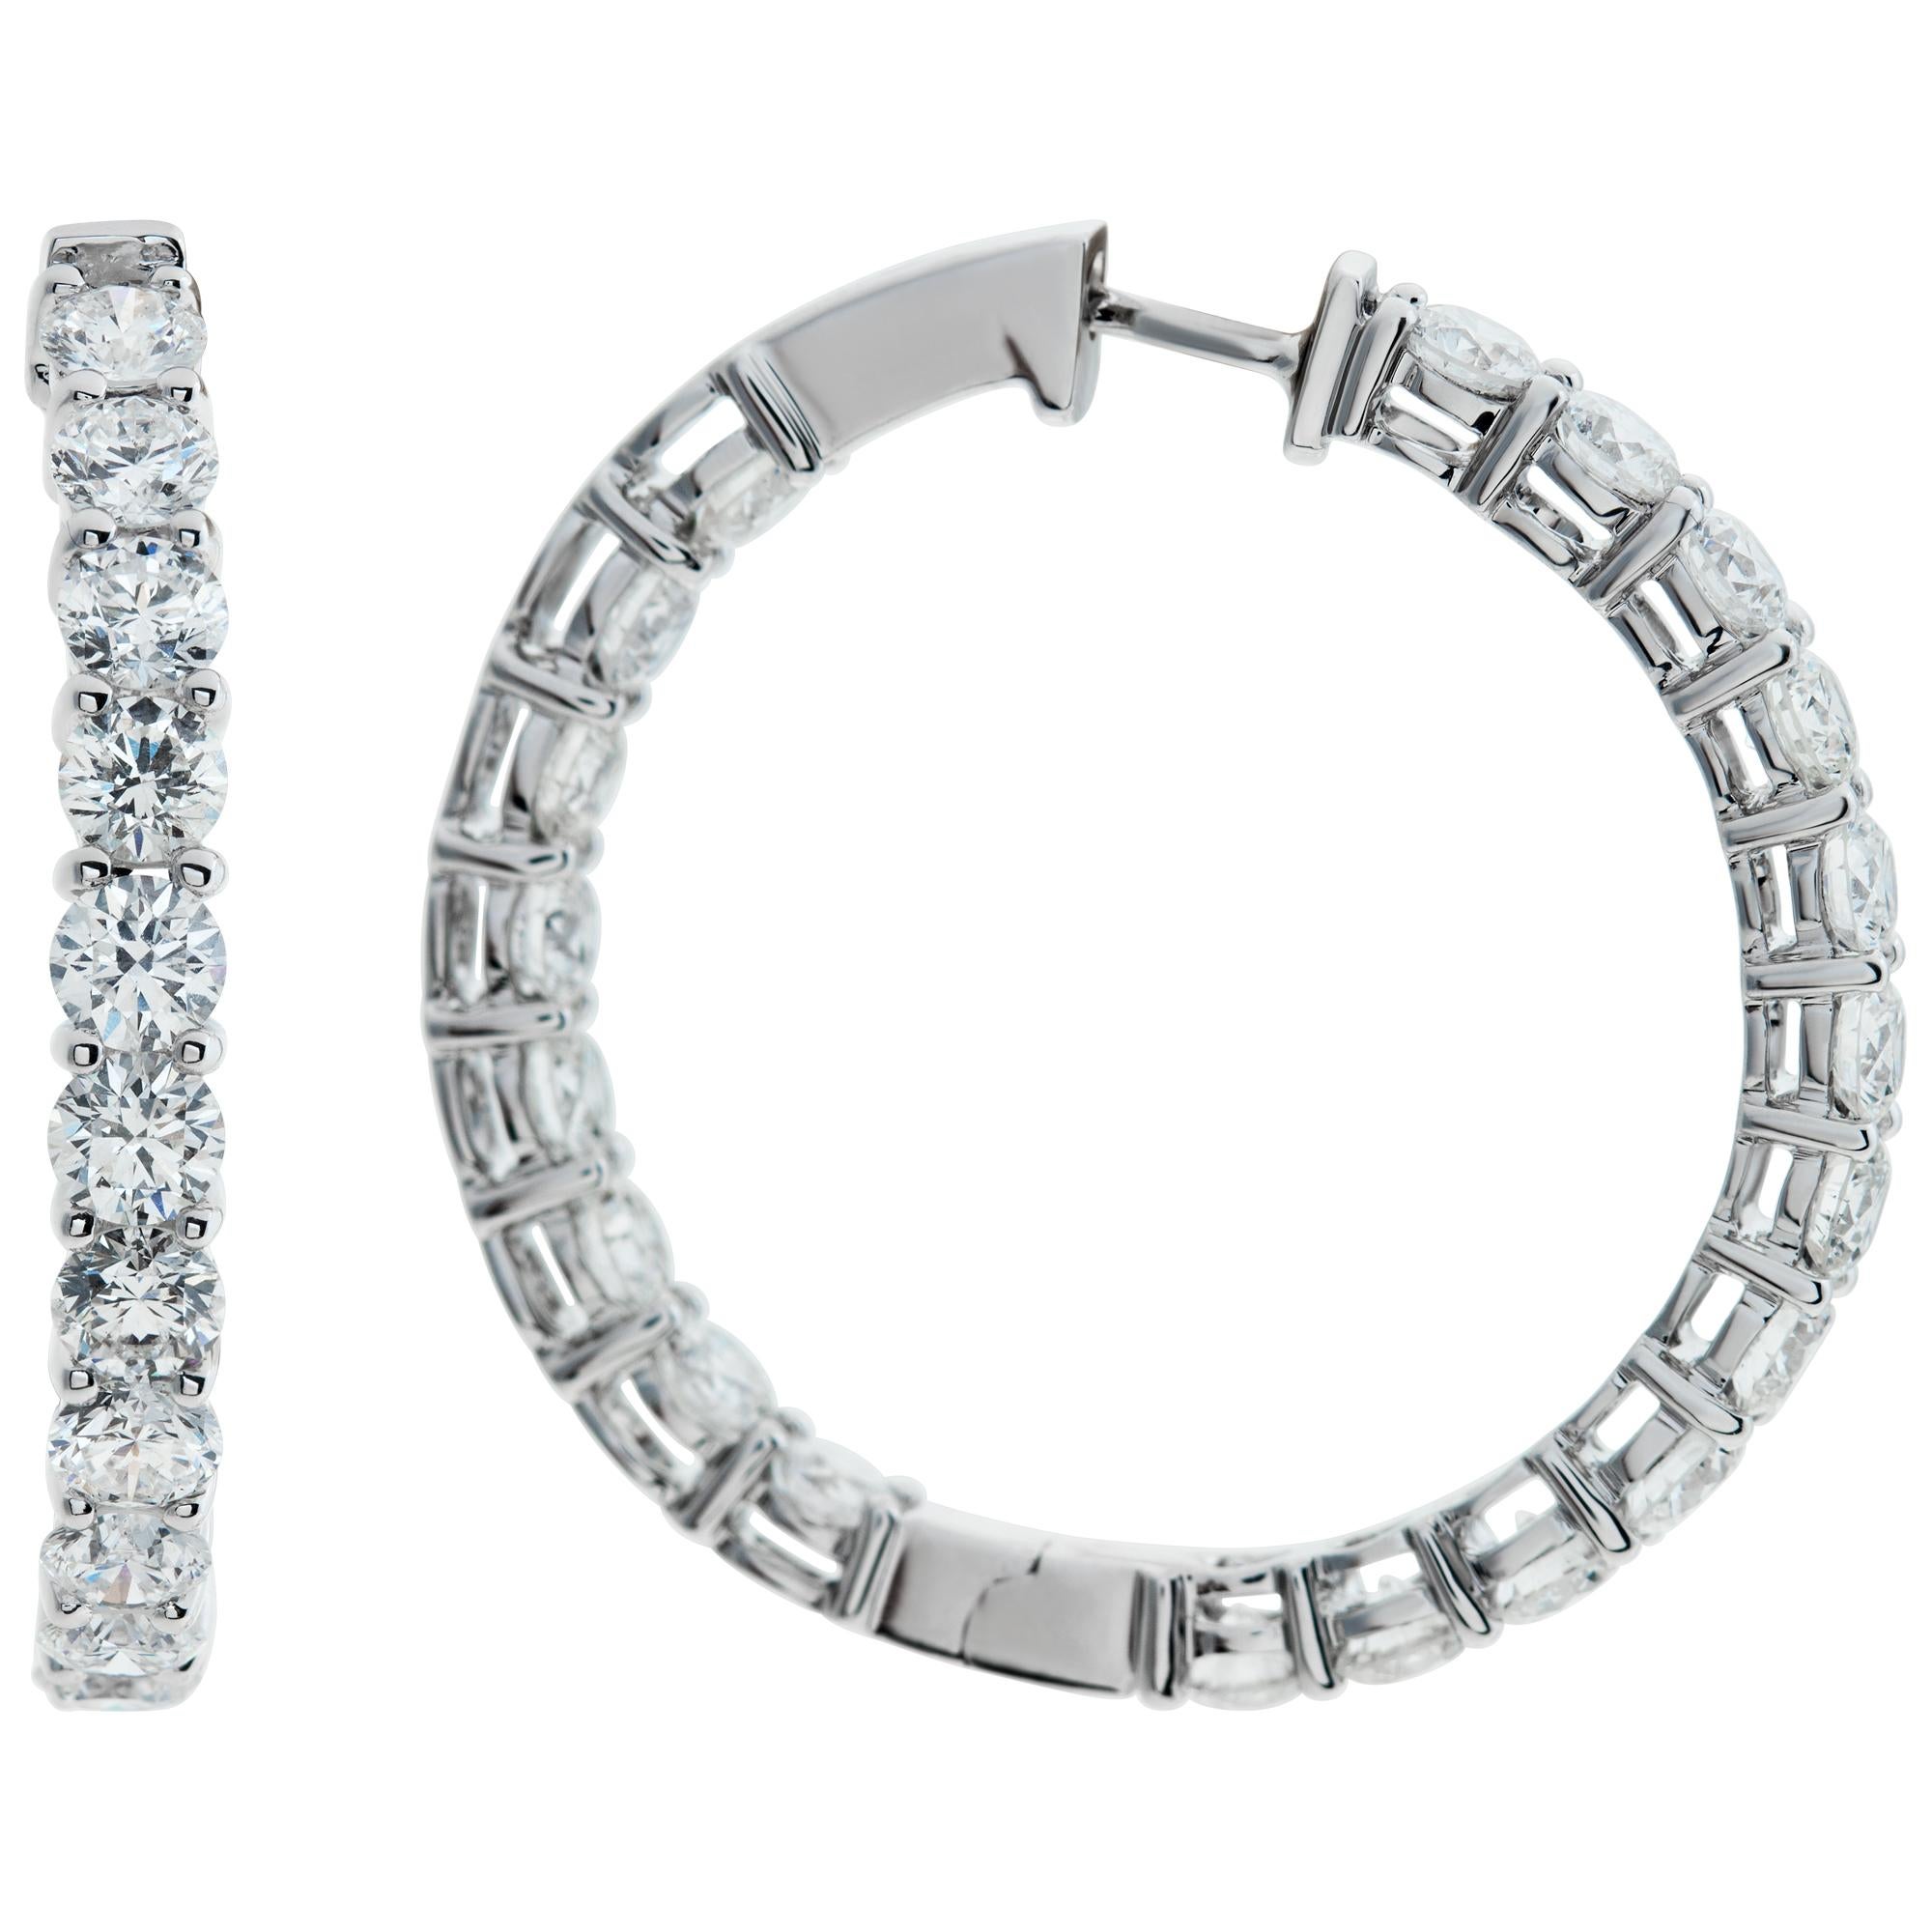 18k white gold inside-out diamond hoop earrings In Excellent Condition For Sale In Surfside, FL